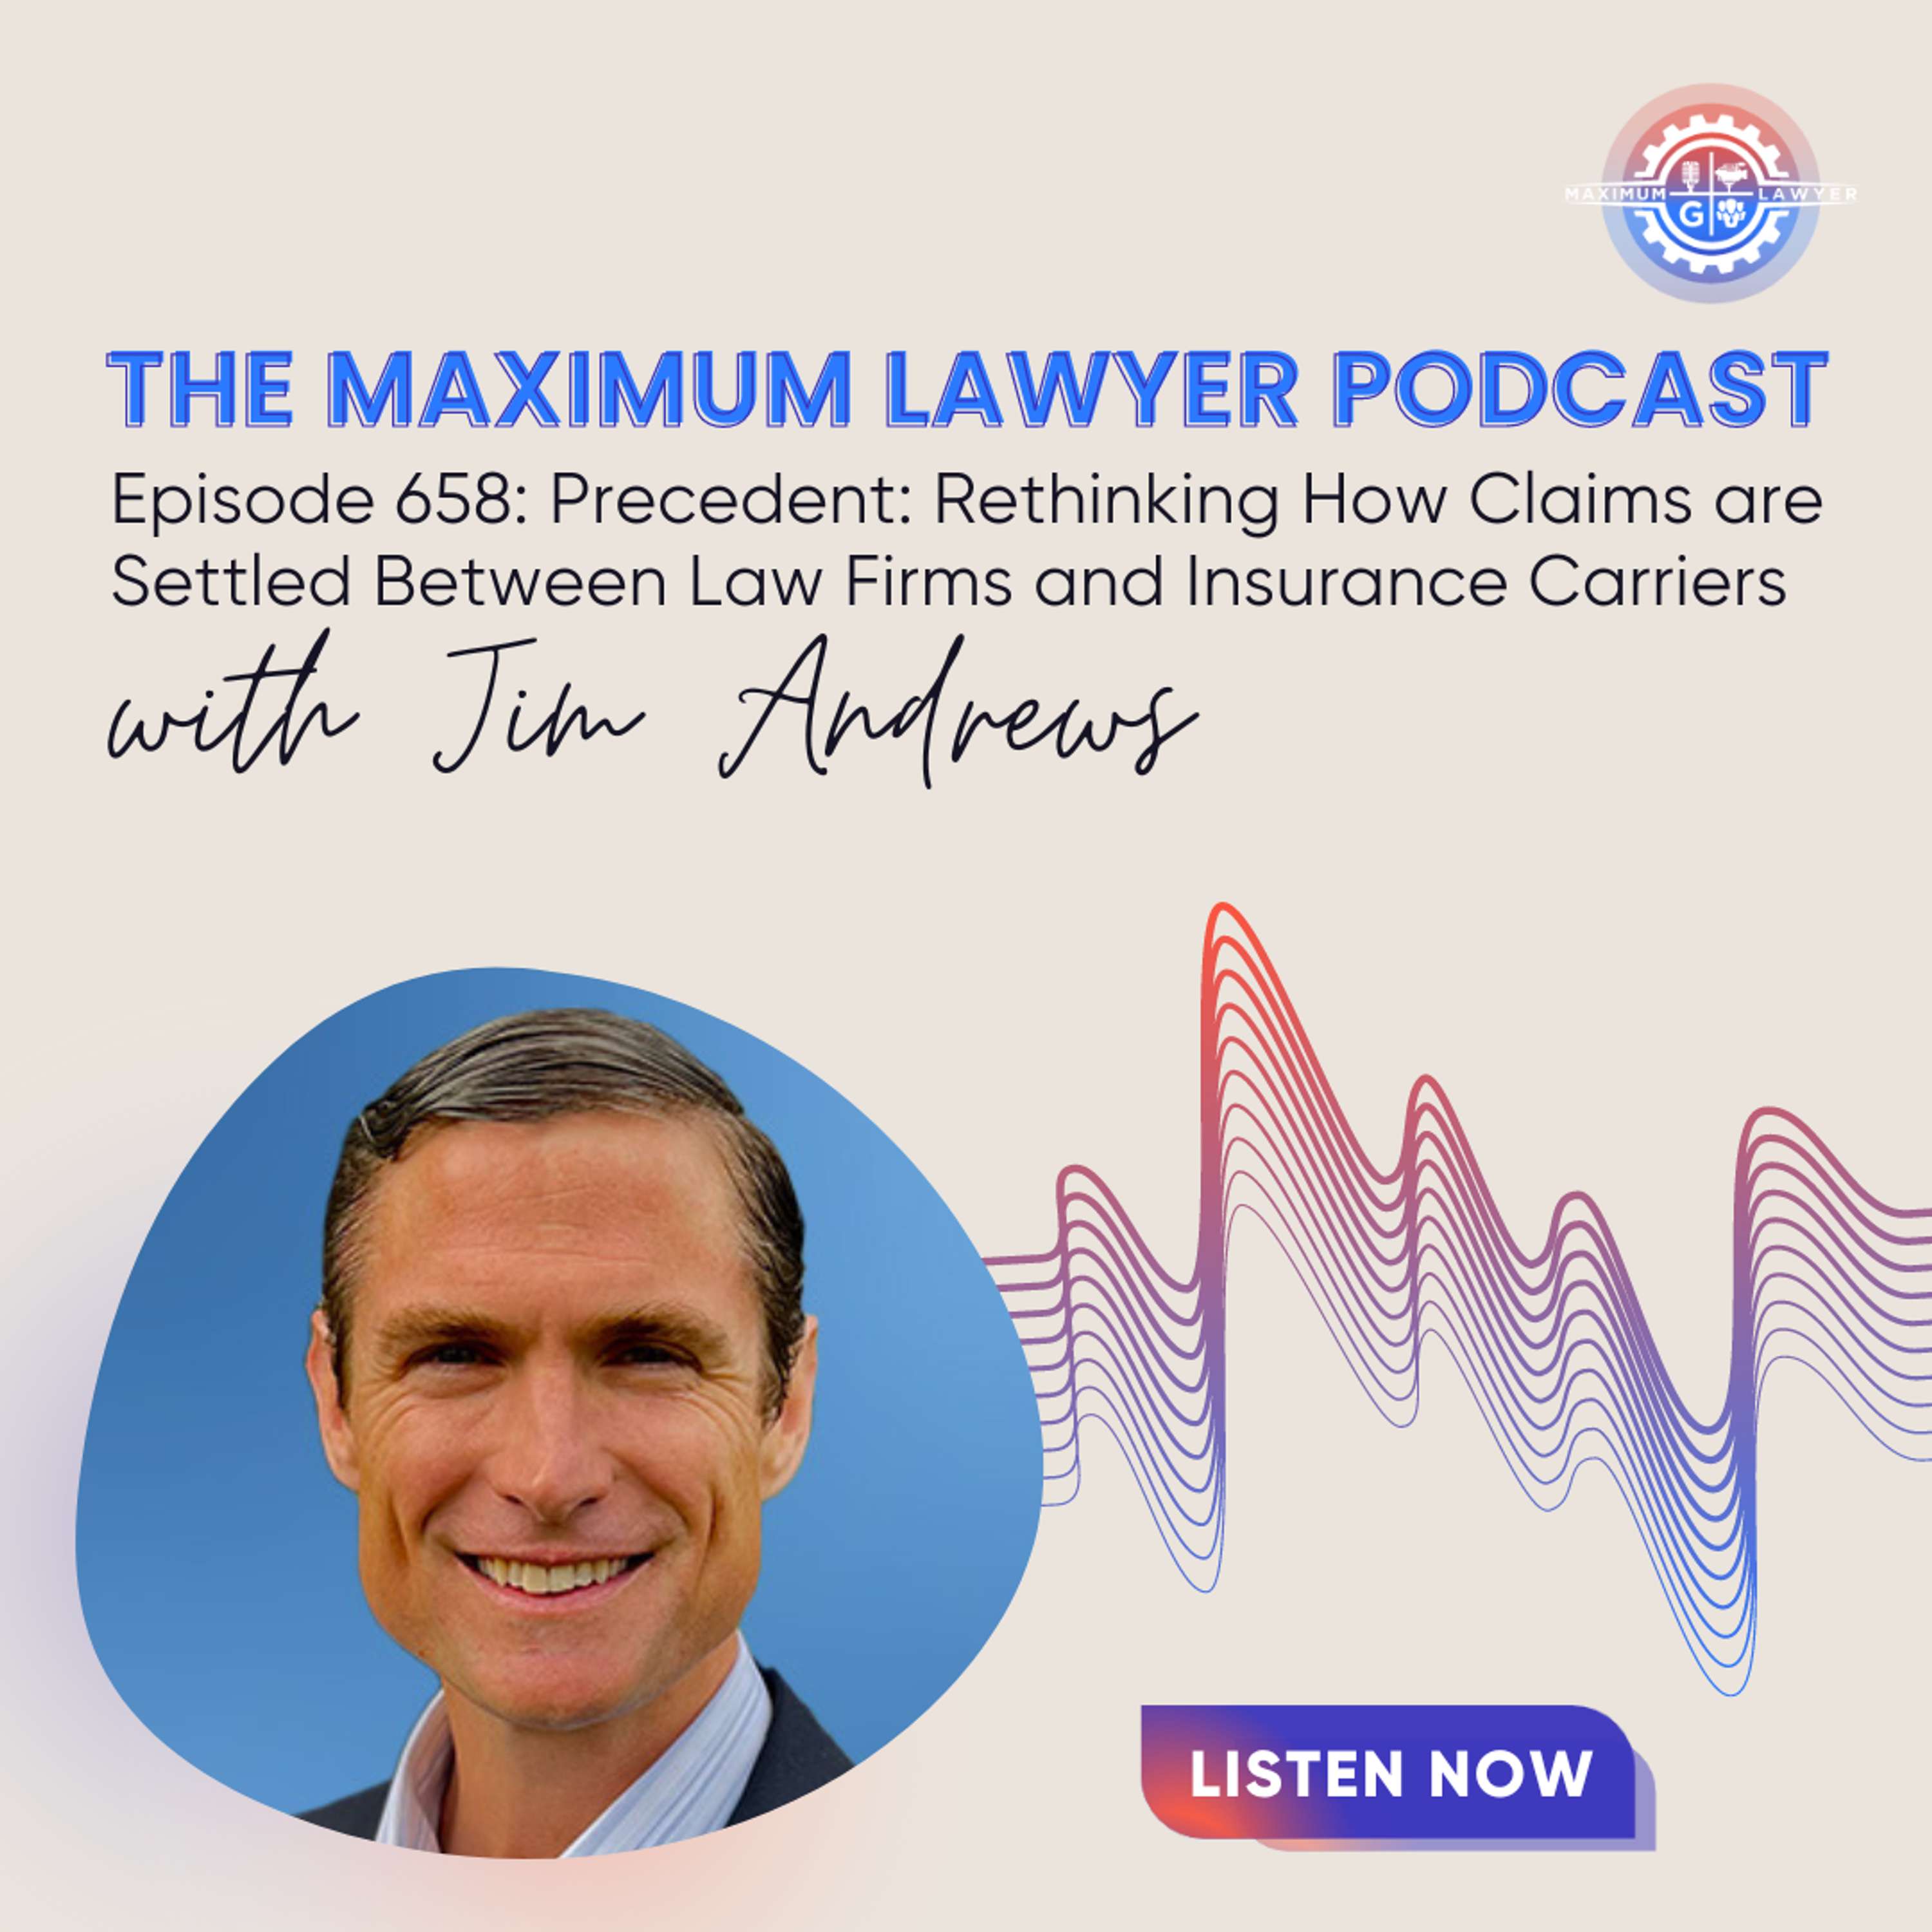 Precedent: Rethinking How Claims are Settled Between Law Firms and Insurance Carriers with Jim Andrews